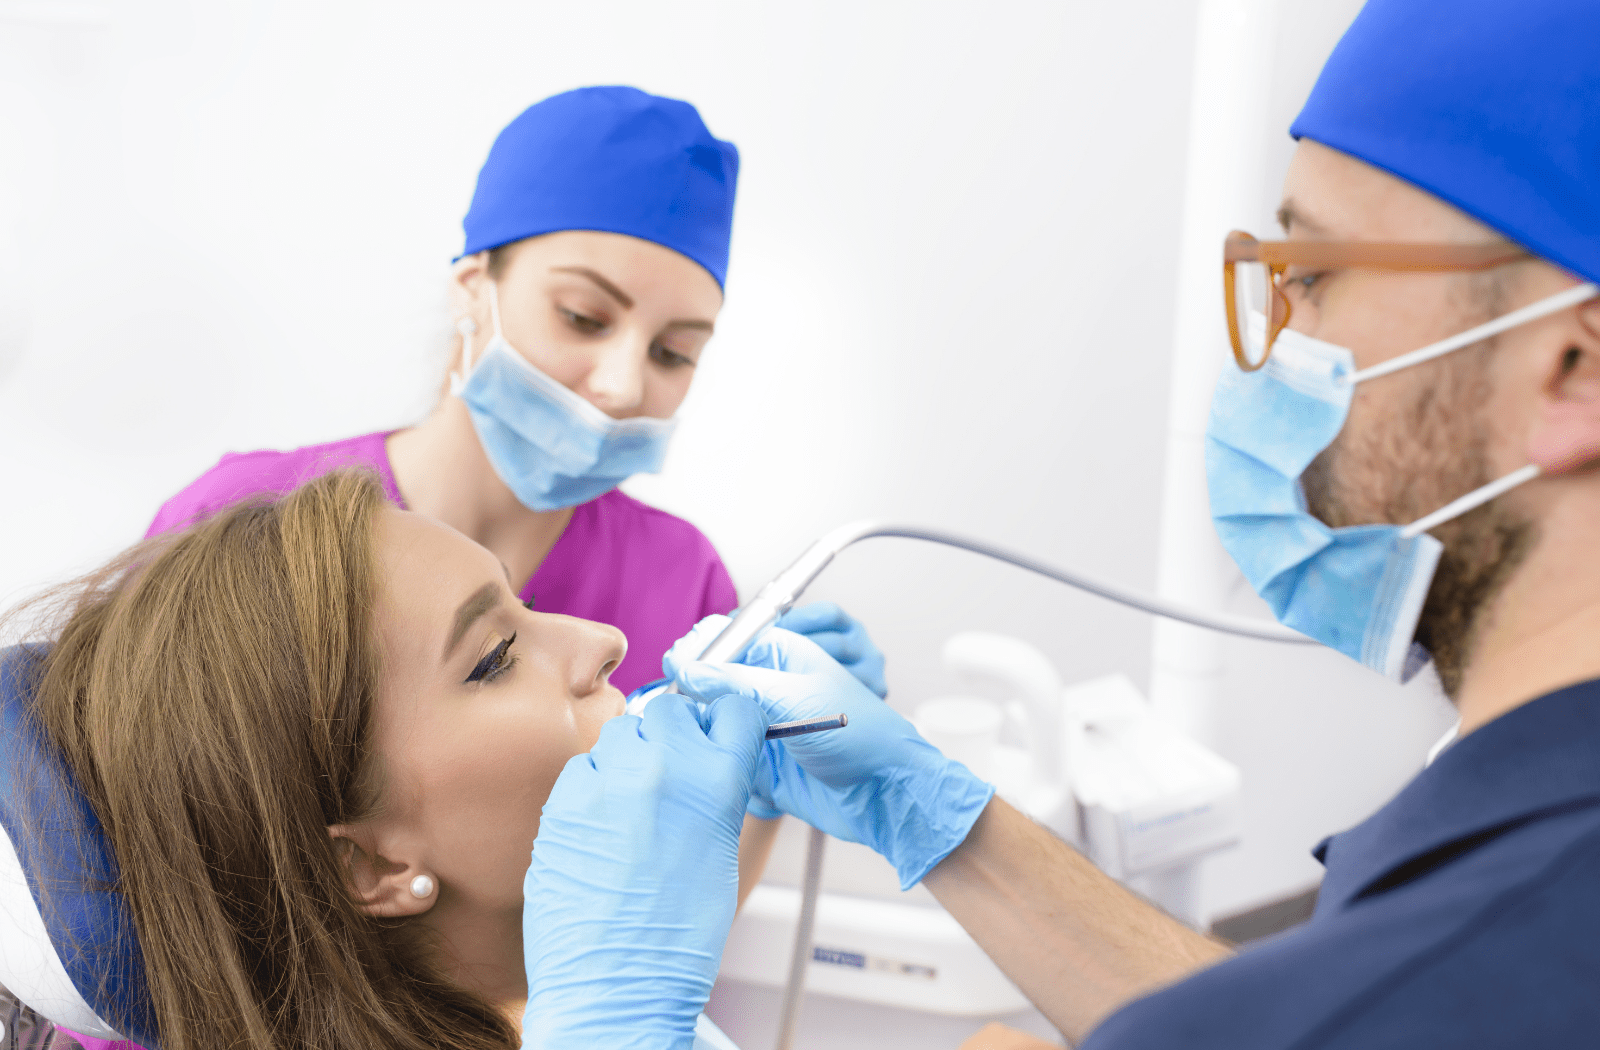 A male dentist and female dental hygienist preparing to do a root canal on the patients teeth